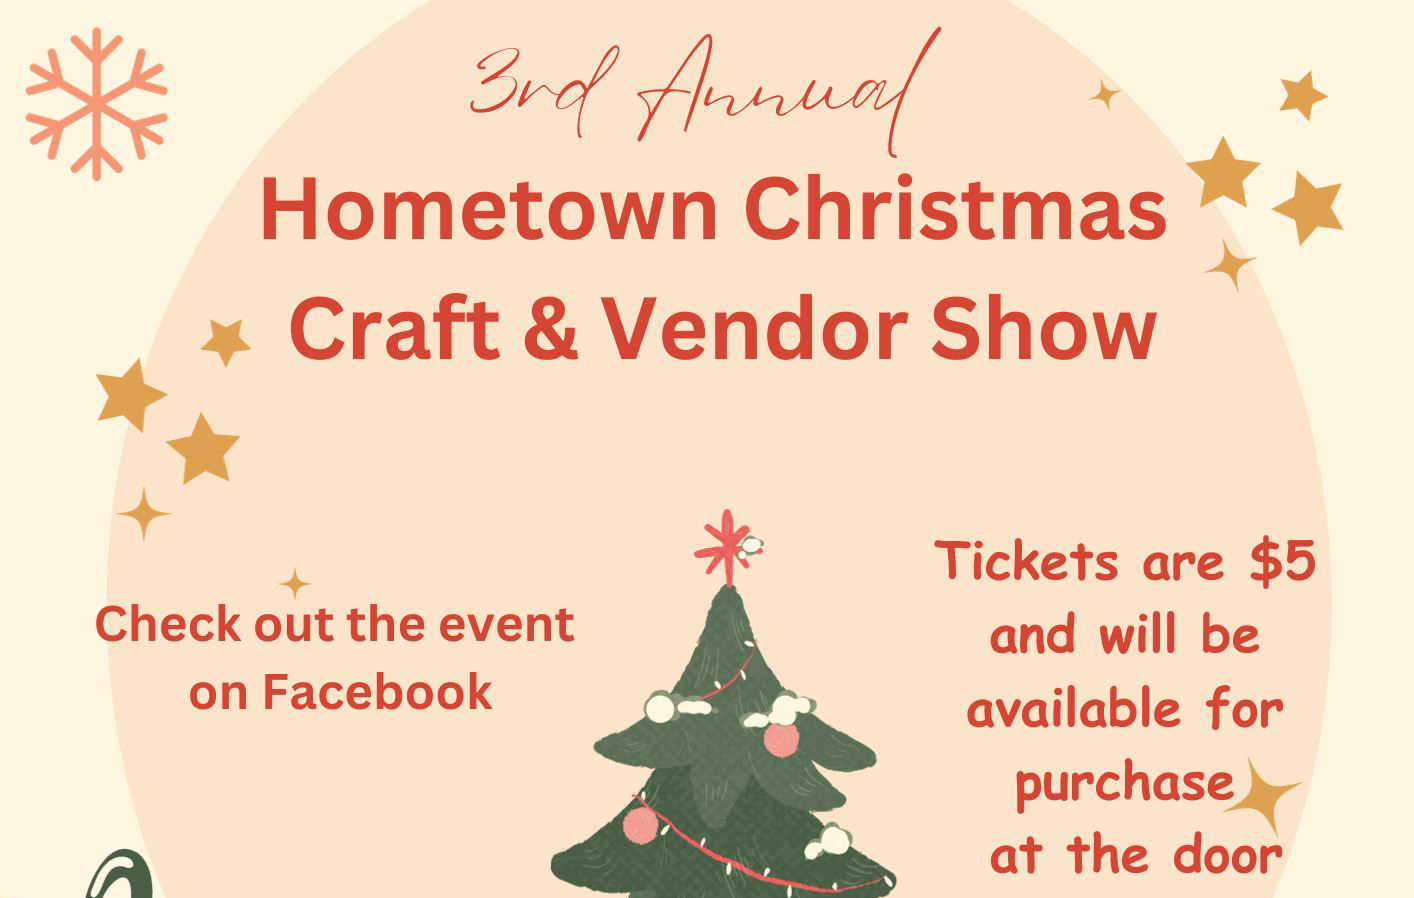 Cropped version of the flyer for the Hometown Christmas Craft Show at the Sackets Harbor Ballroom